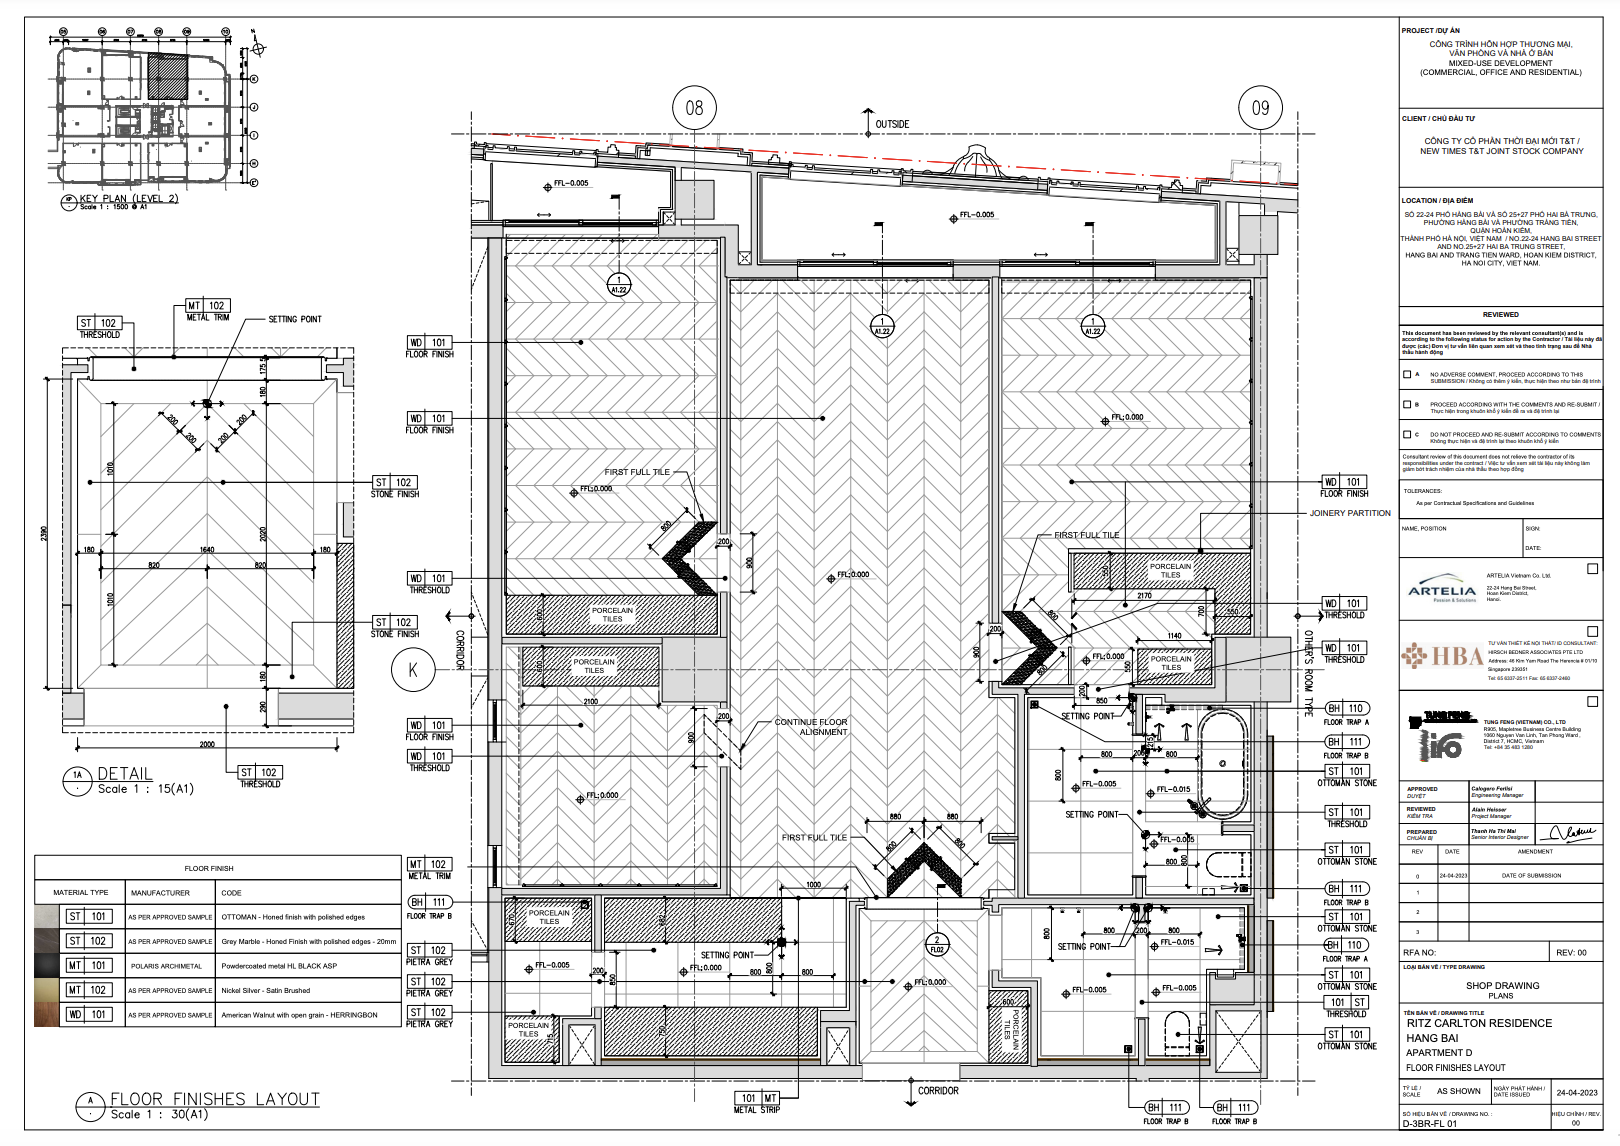 The Ritz Carlton Mix-used Building technical drawing